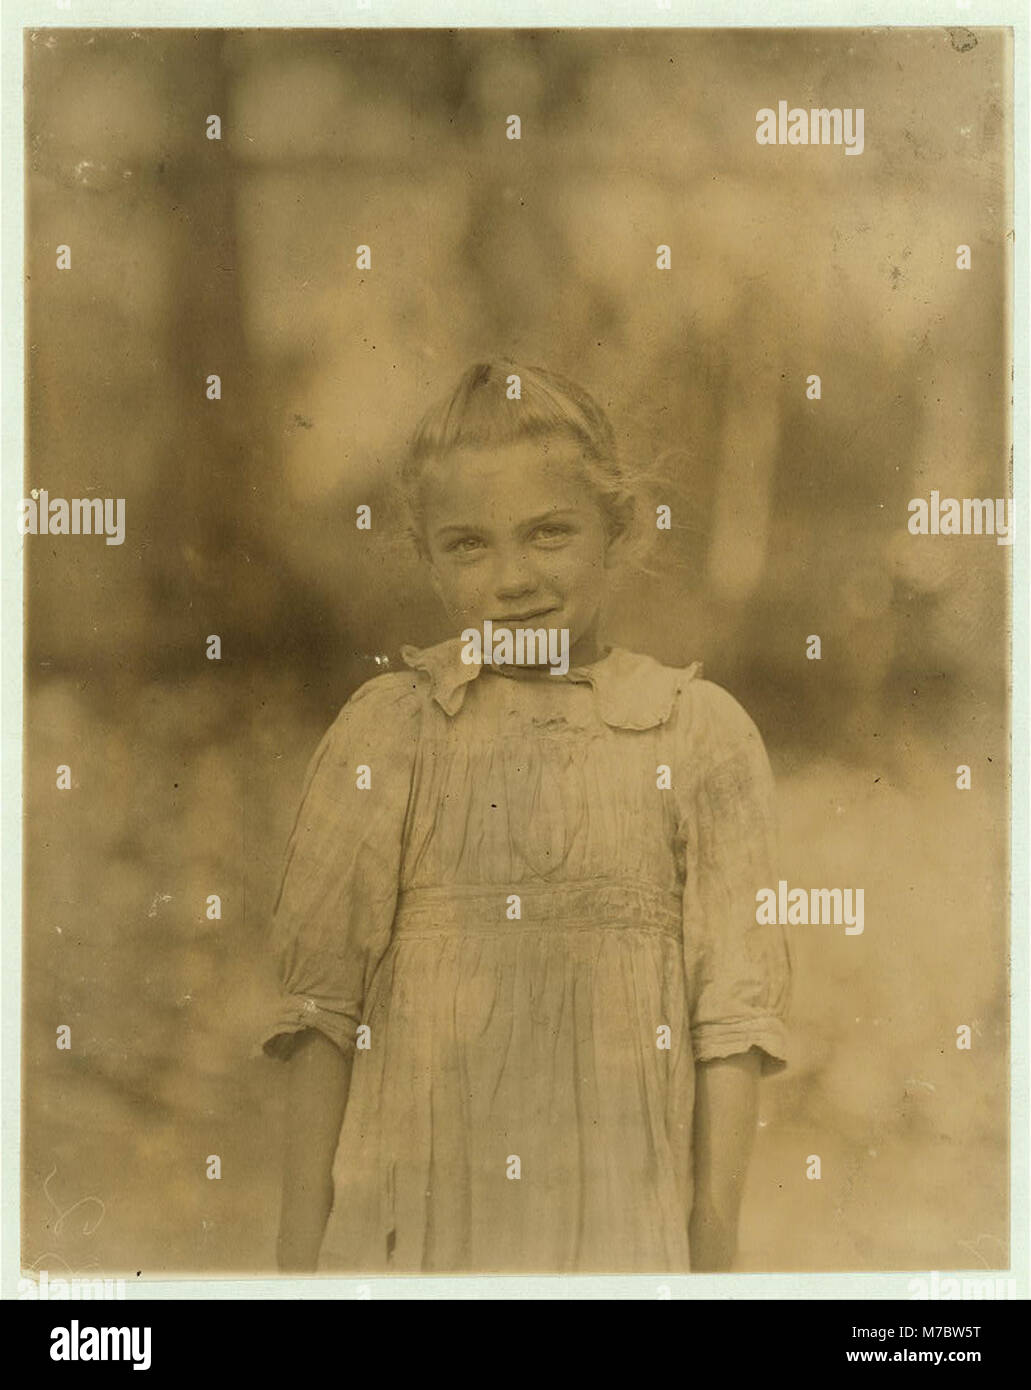 7-year old Rosie. Regular shucker. Her second year at it. Illiterate. Works all day. Shucks only a few pots a day. Varn & Platt Canning Co. LOC nclc.01012 Stock Photo